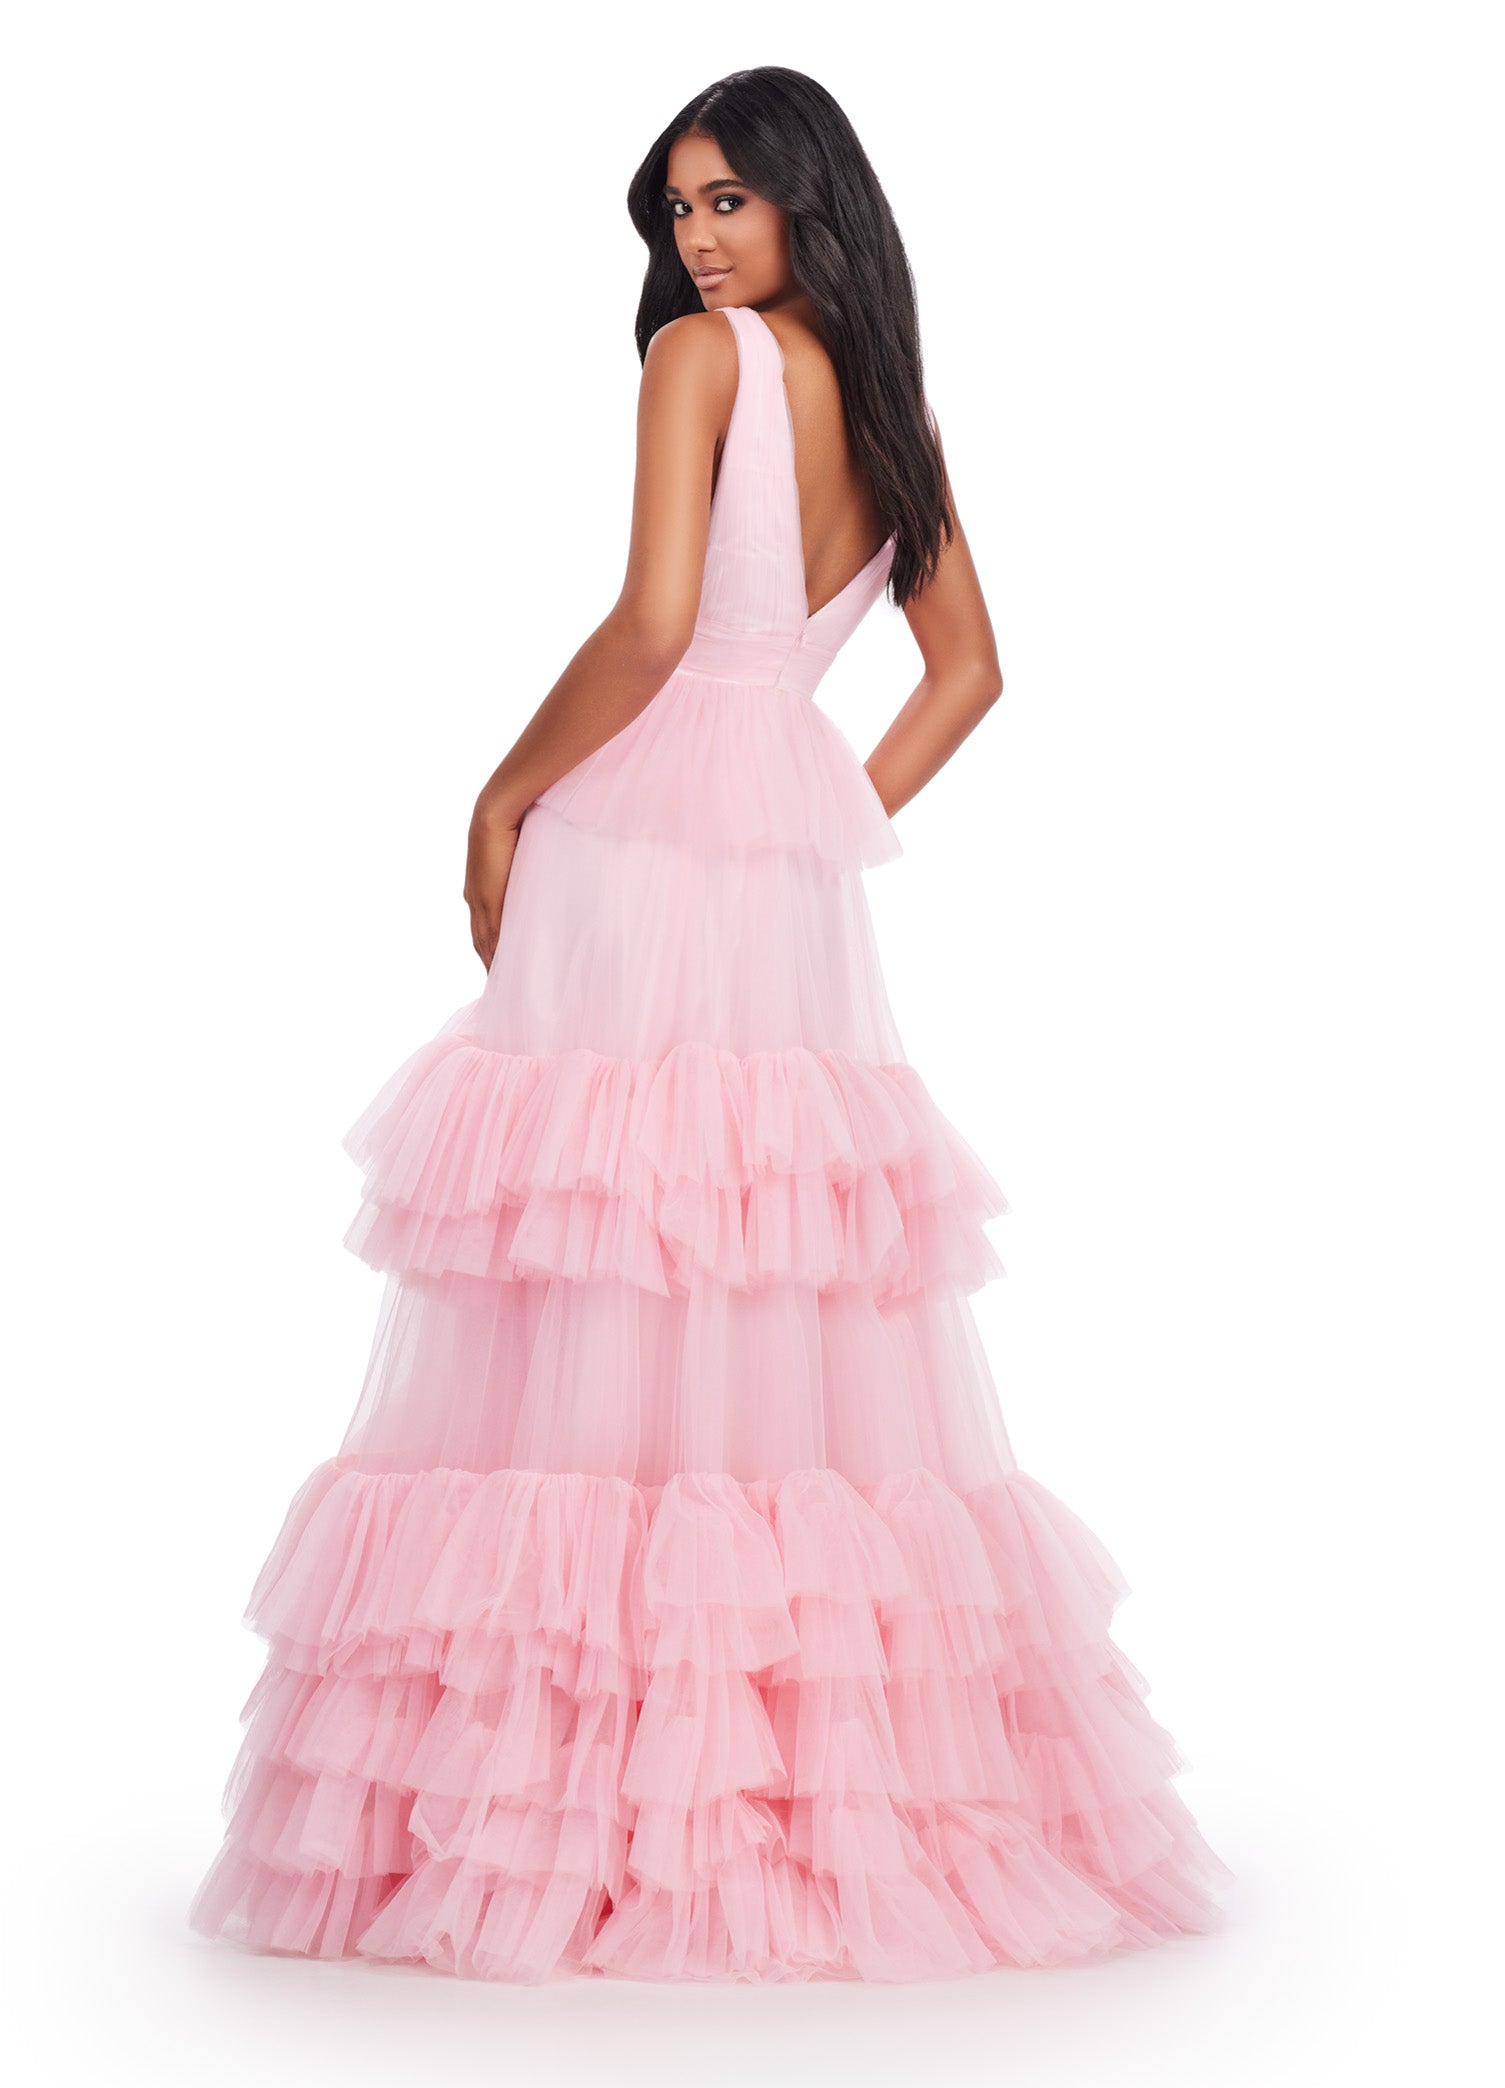 Elevate your formal wardrobe with the Ashley Lauren 11620 Long Prom Dress. Featuring a stunning V-neck, tiered tulle ball gown design, this dress will make you stand out at any event. Made with high-quality materials, it combines elegance and comfort for a truly unforgettable look. The dreamy ball gown features a v-neckline bustier accented by a multi-tiered tulle ruffle skirt.